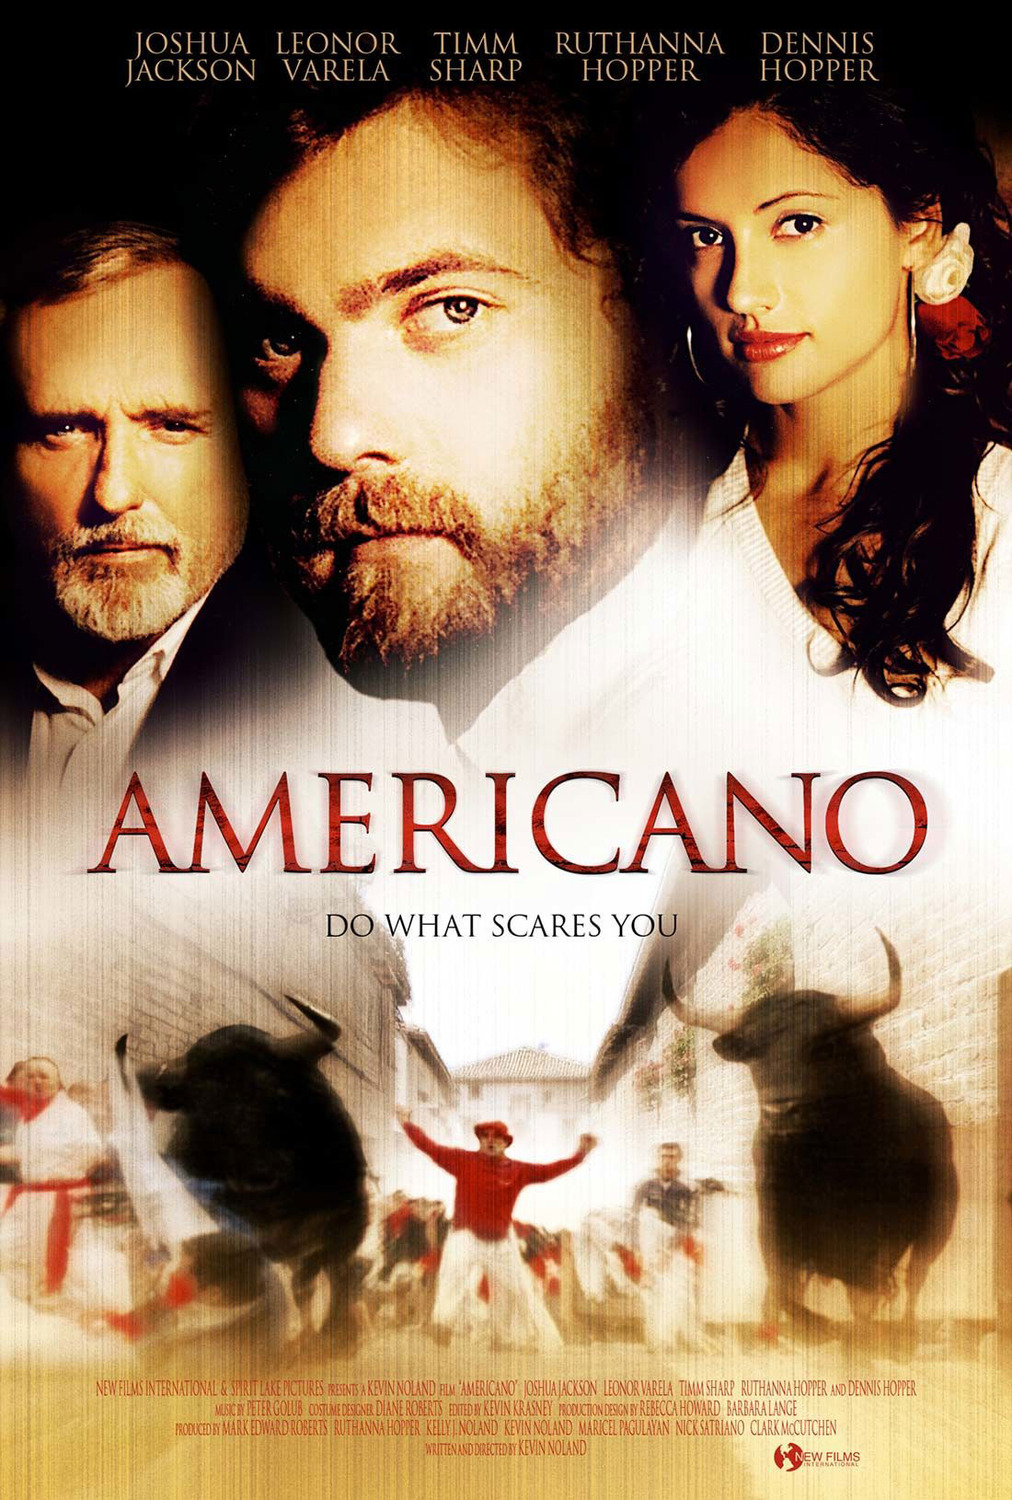 Extra Large Movie Poster Image for Americano (#2 of 2)